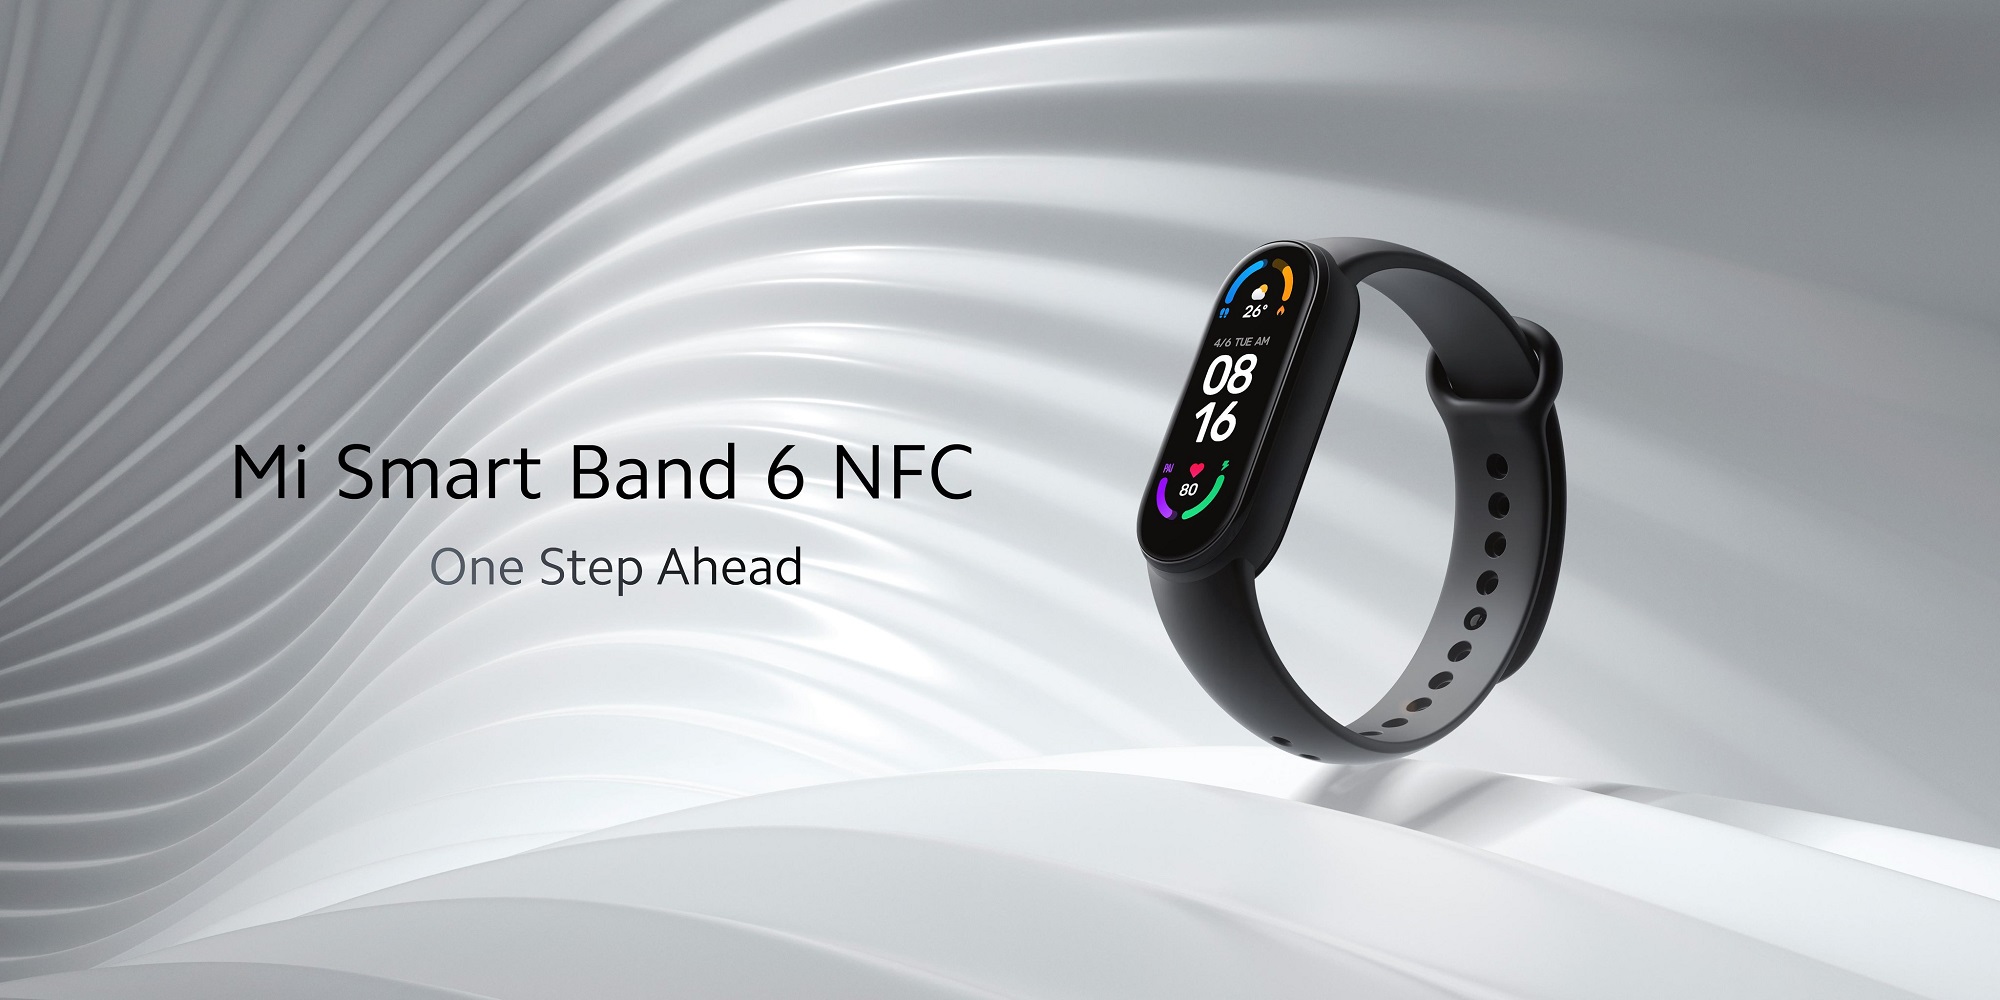 Xiaomi Mi Smart Band 6 NFC: Contactless payments and the best price